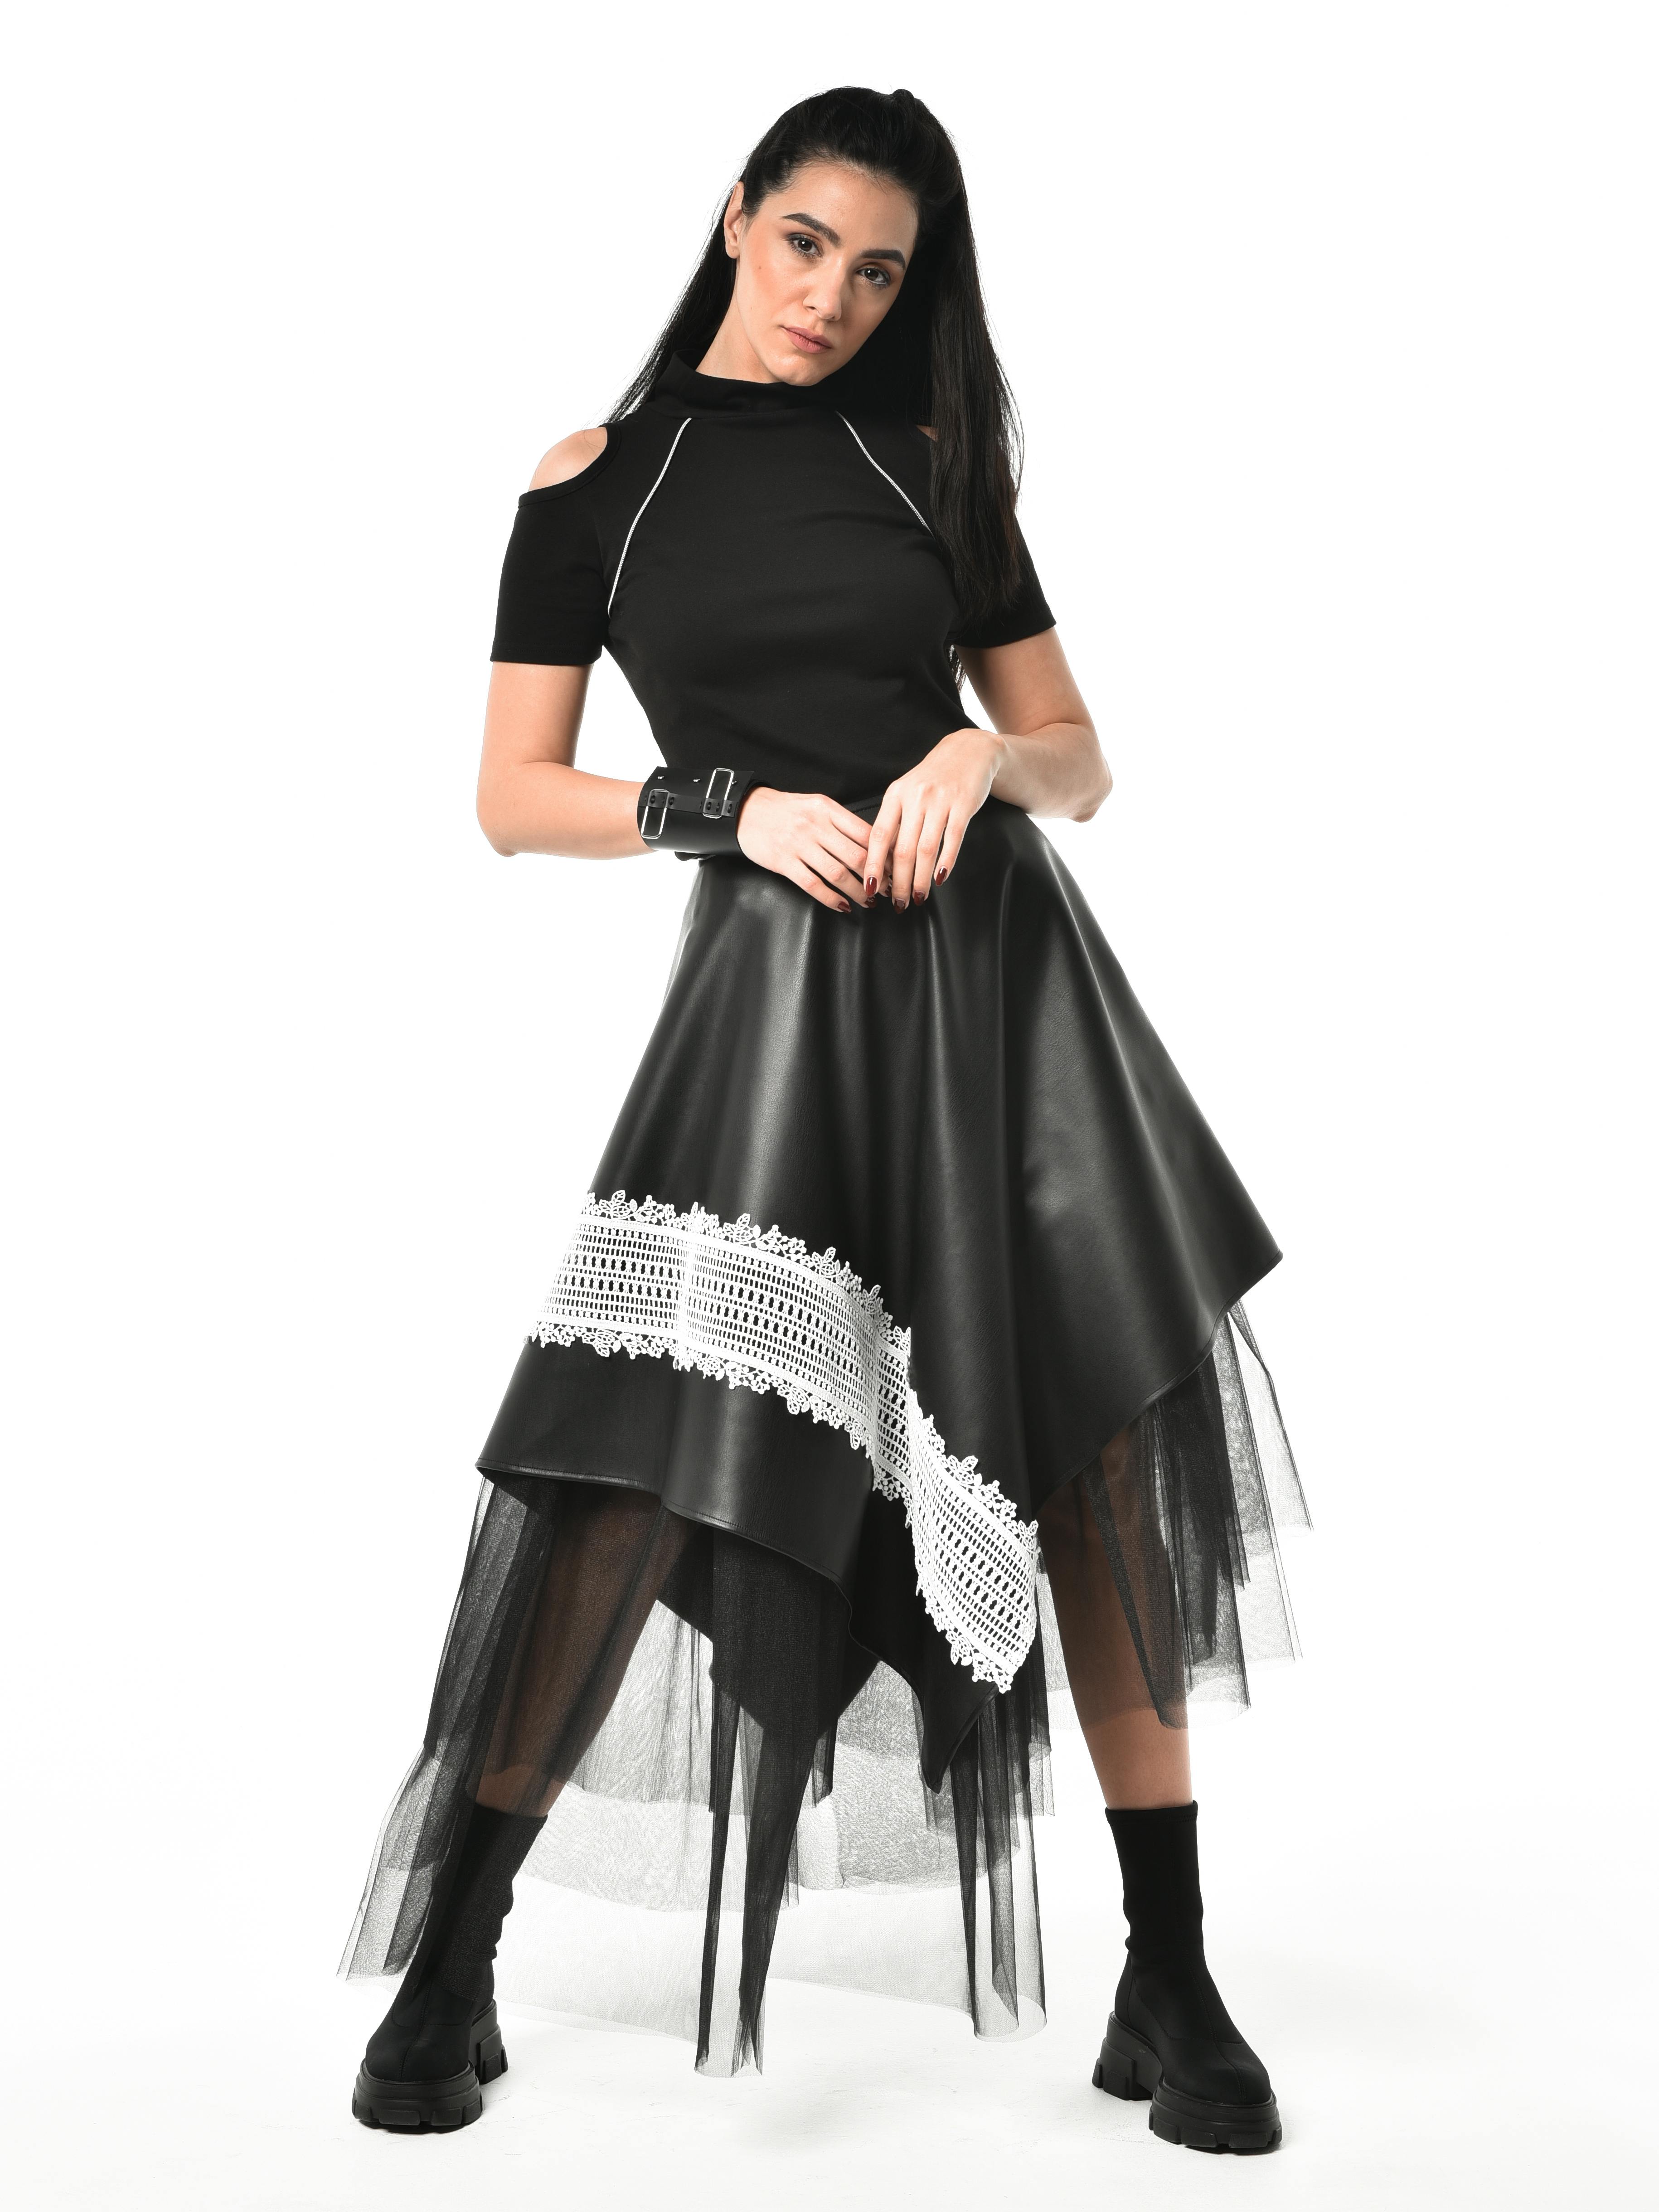 Vegan Leather Skirt With Tulle and Lace , a product by METAMORPHOZA